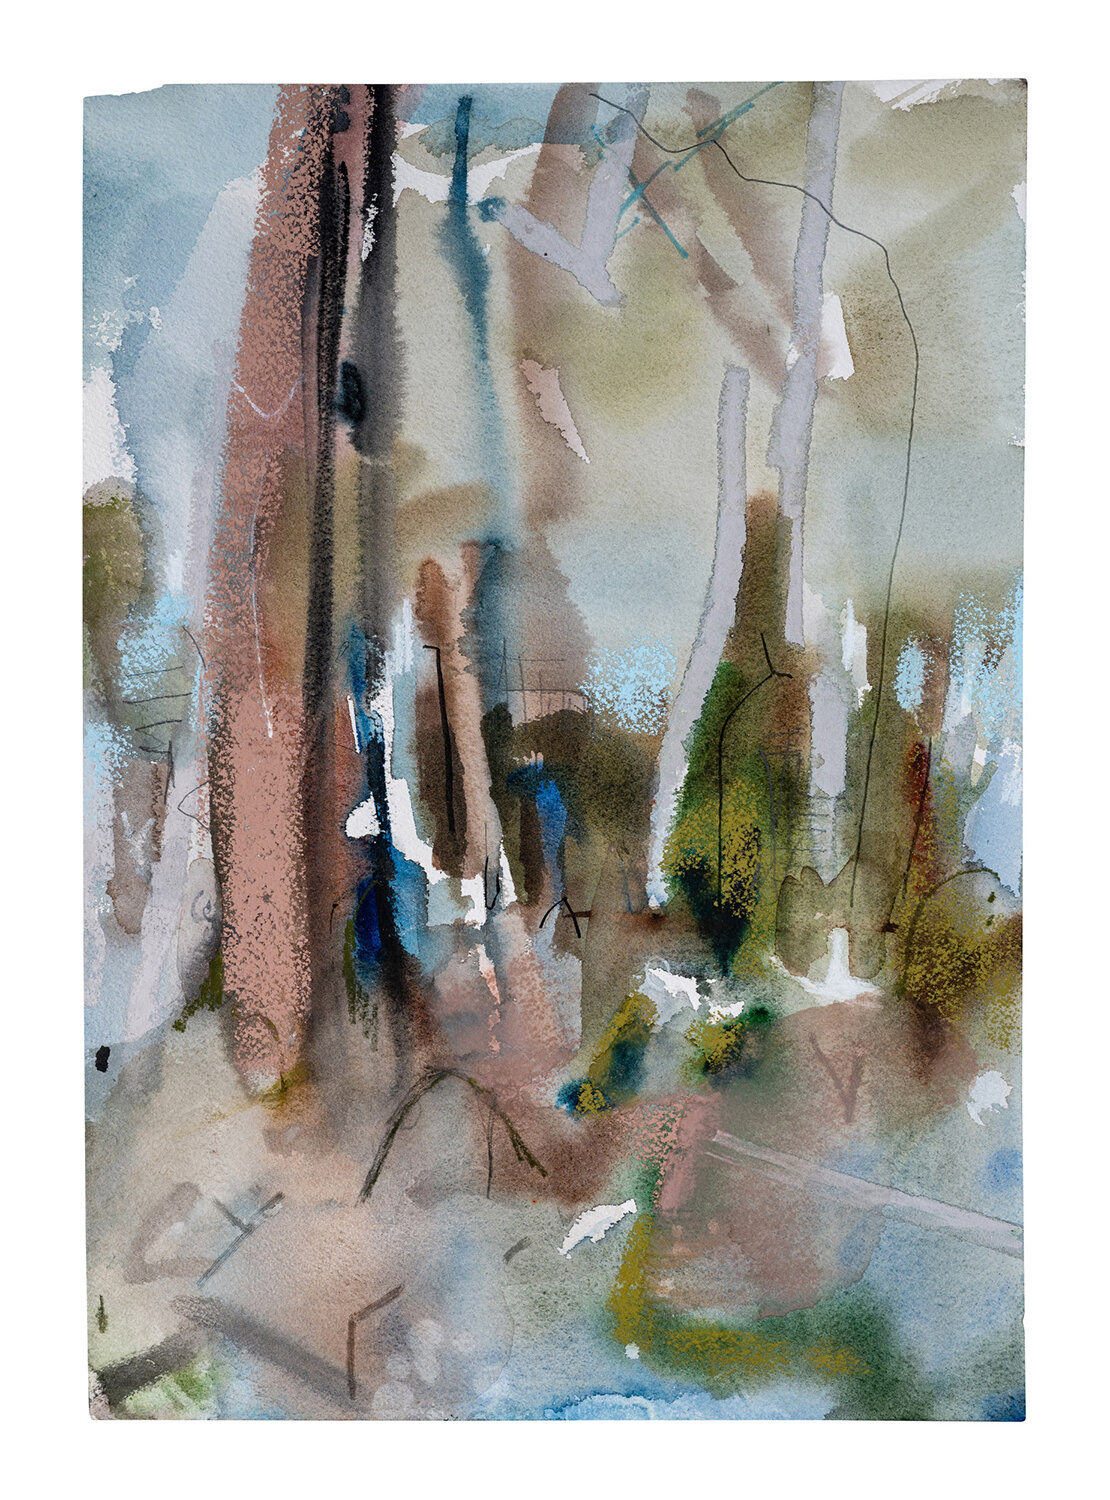   Boranup Forest No 6 , 2021, 69 x 53 cm,  watercolour with pastel and pencil on paper 